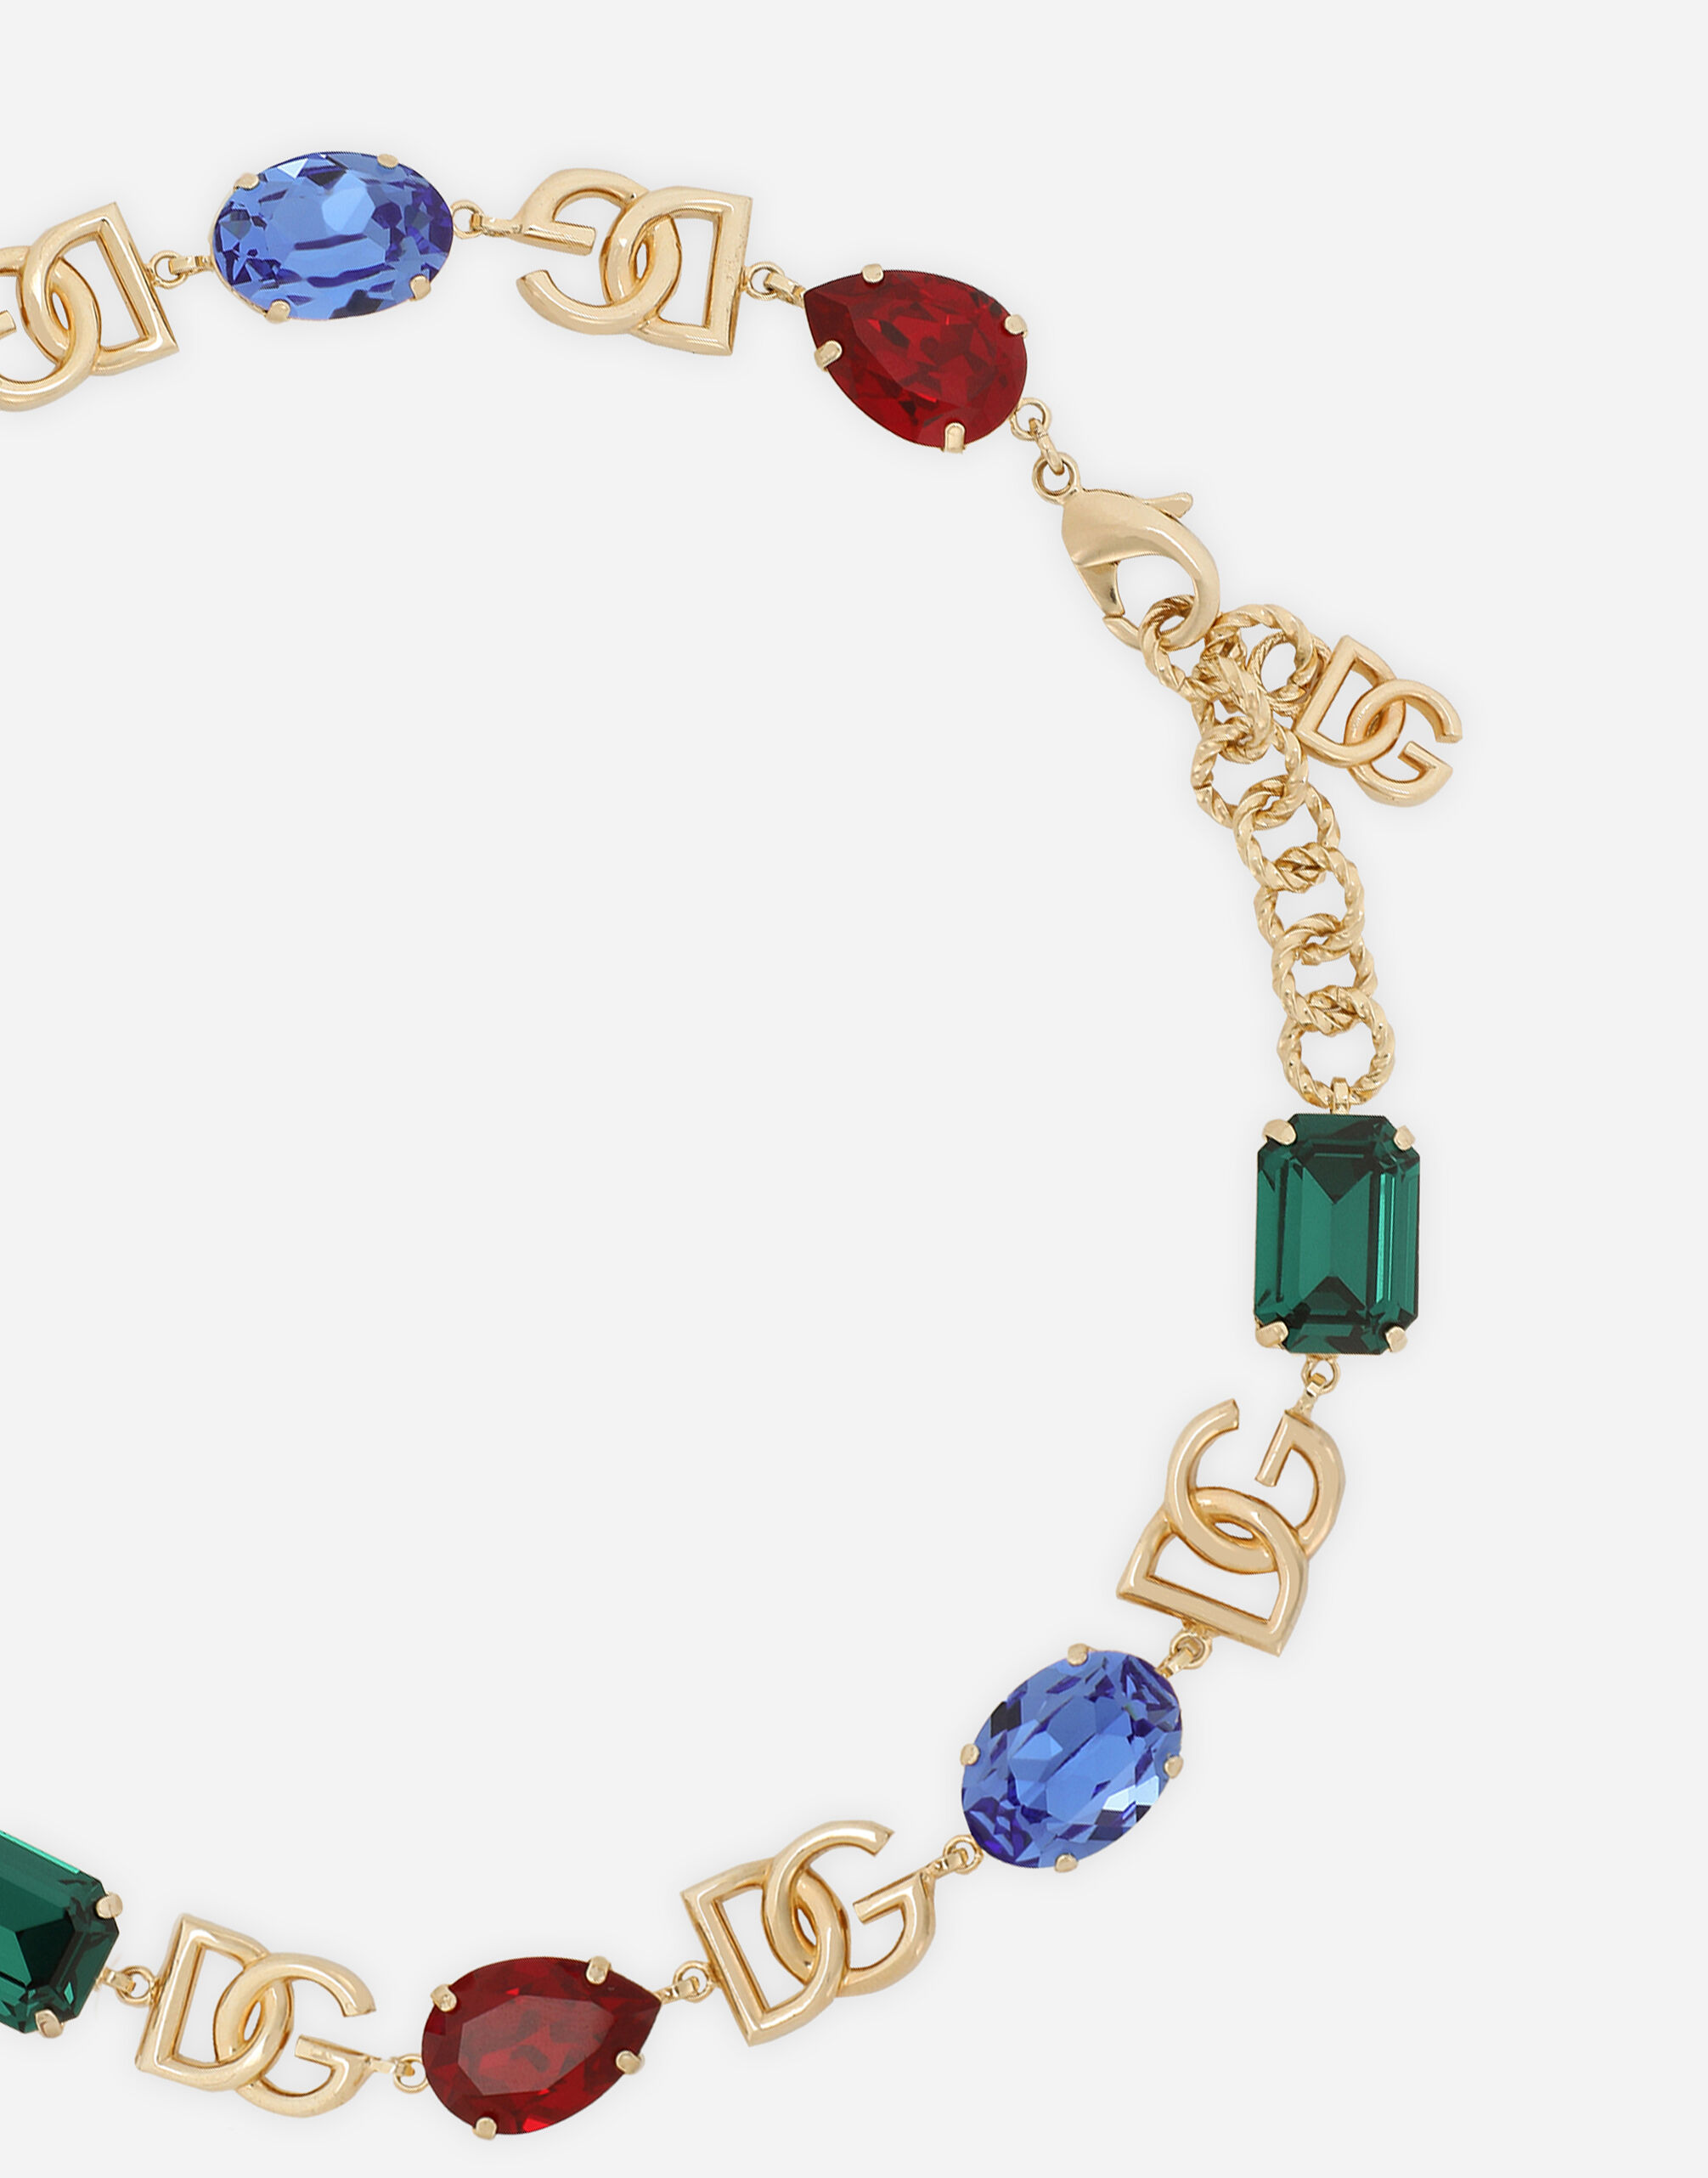 Necklace with DG logo and multi-colored crystals